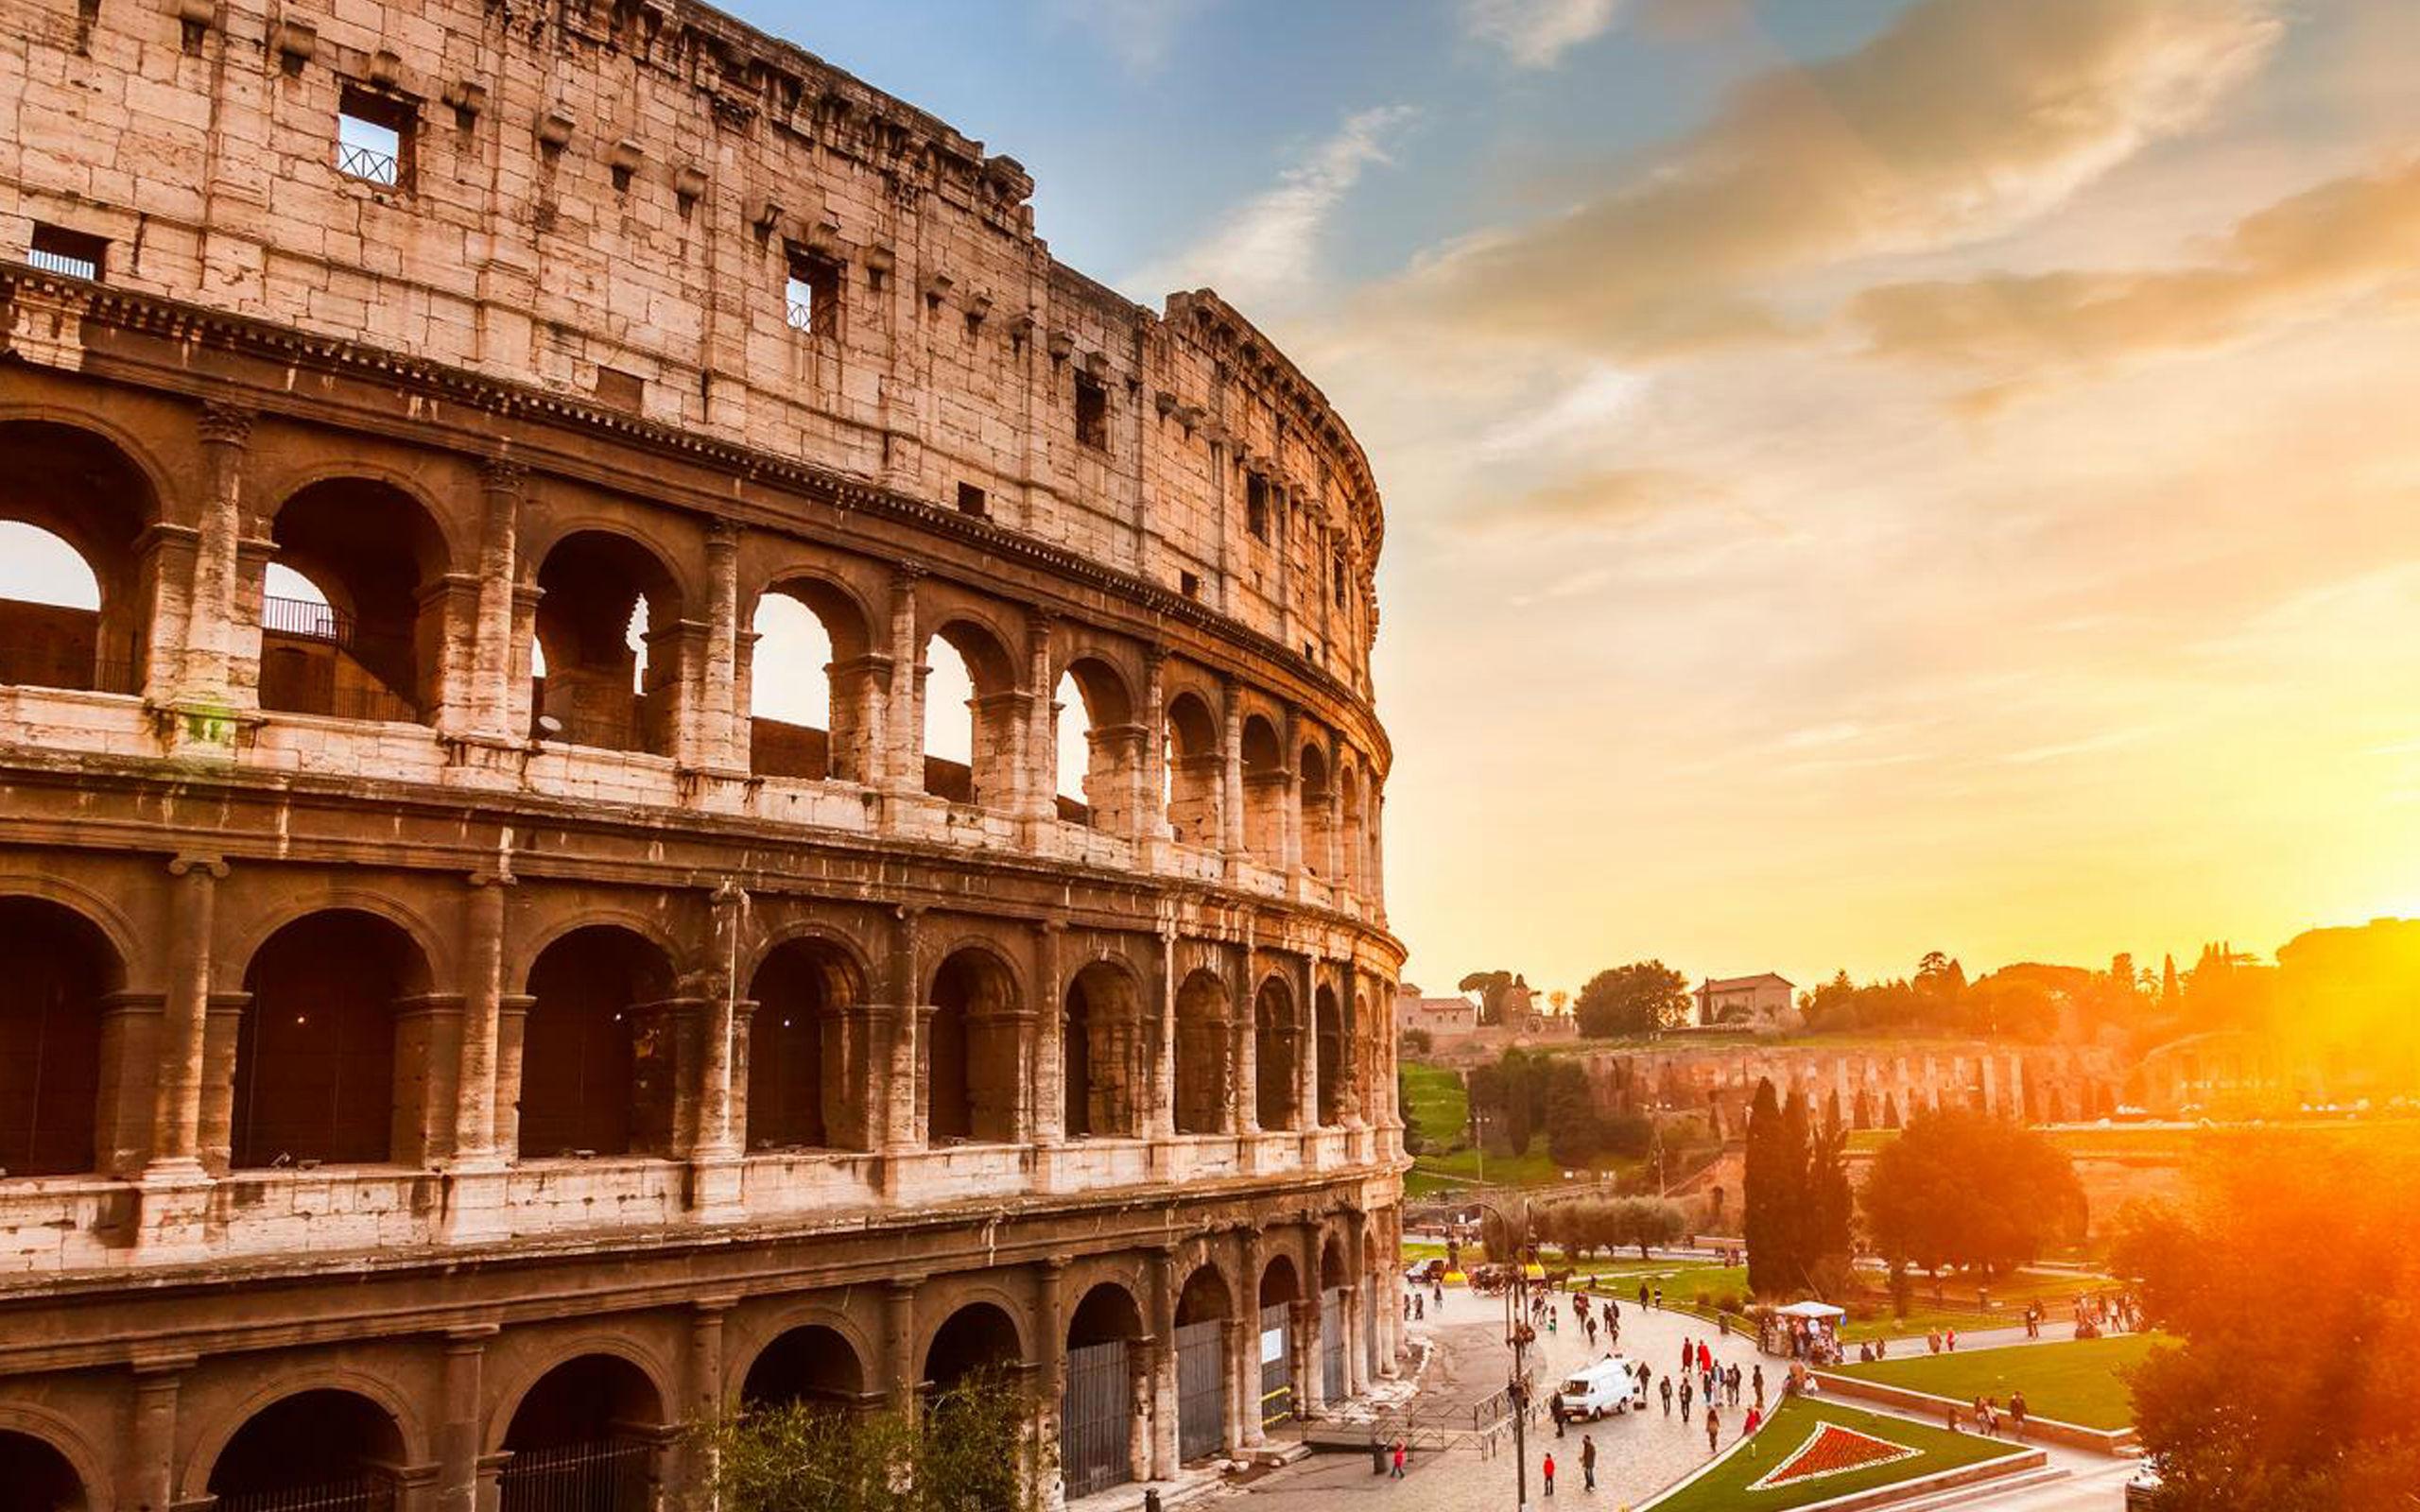 Colosseum Of Rome Picture History And Facts Image Download